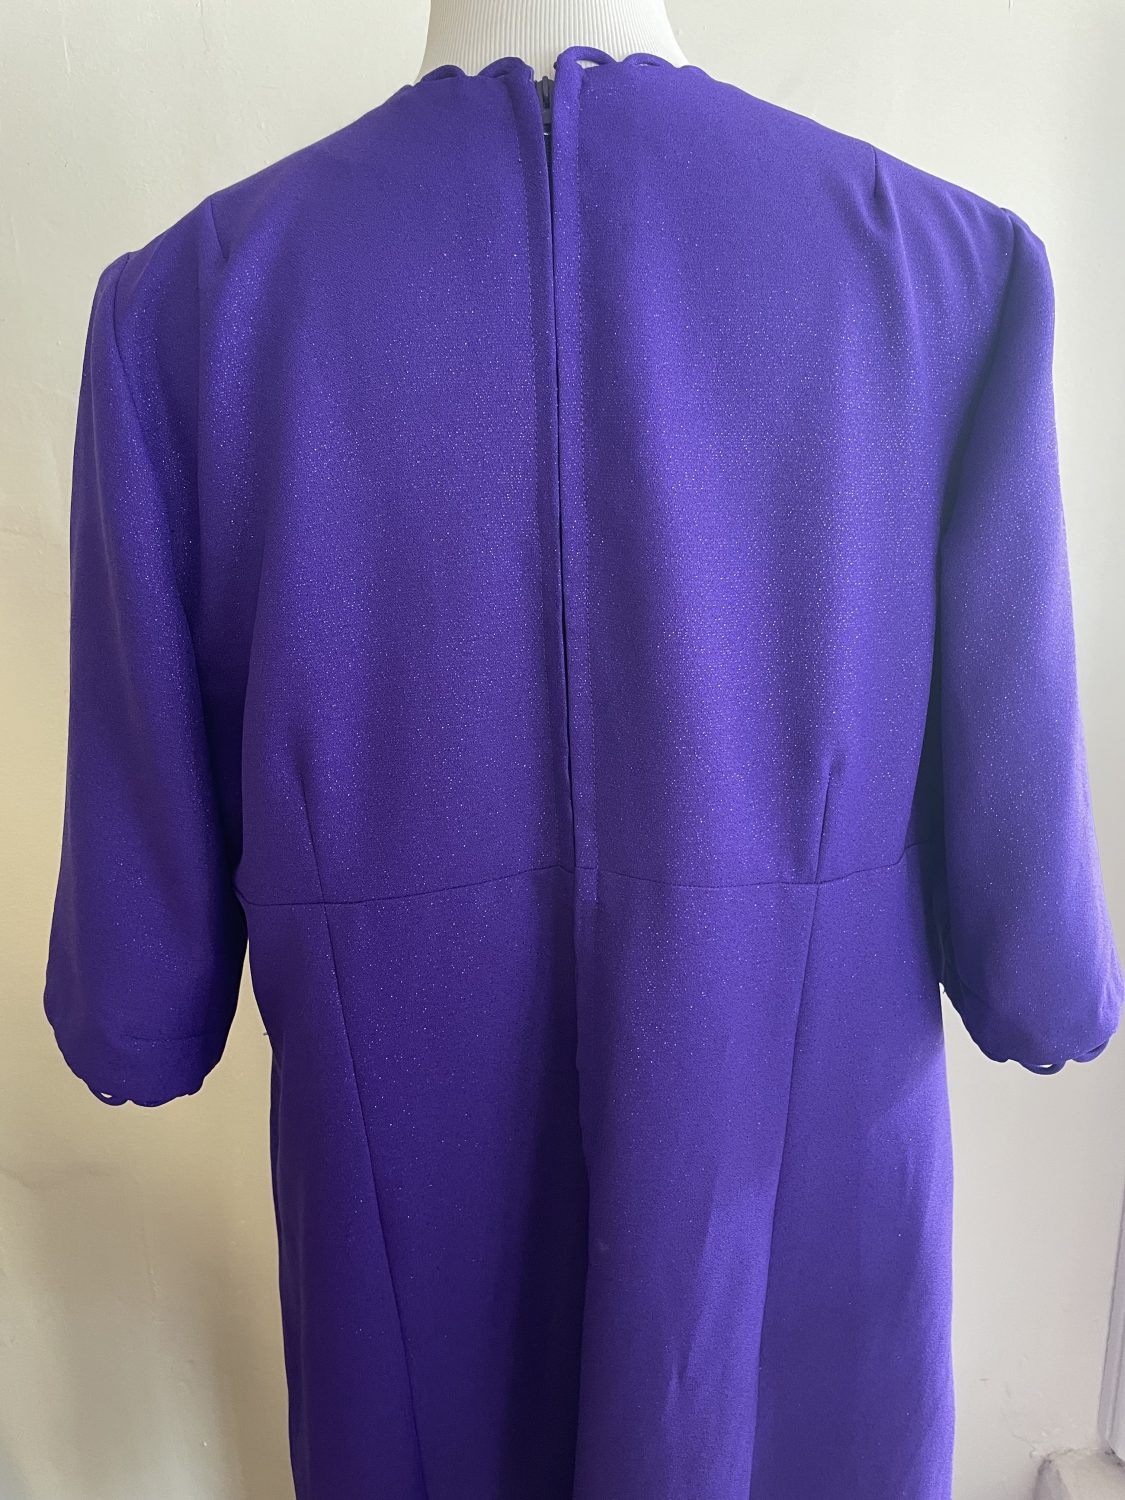 LONG VOILET PURPLE 1970s DRESS WITH DAINTY TRIMMING | Chaos Bazaar Vintage